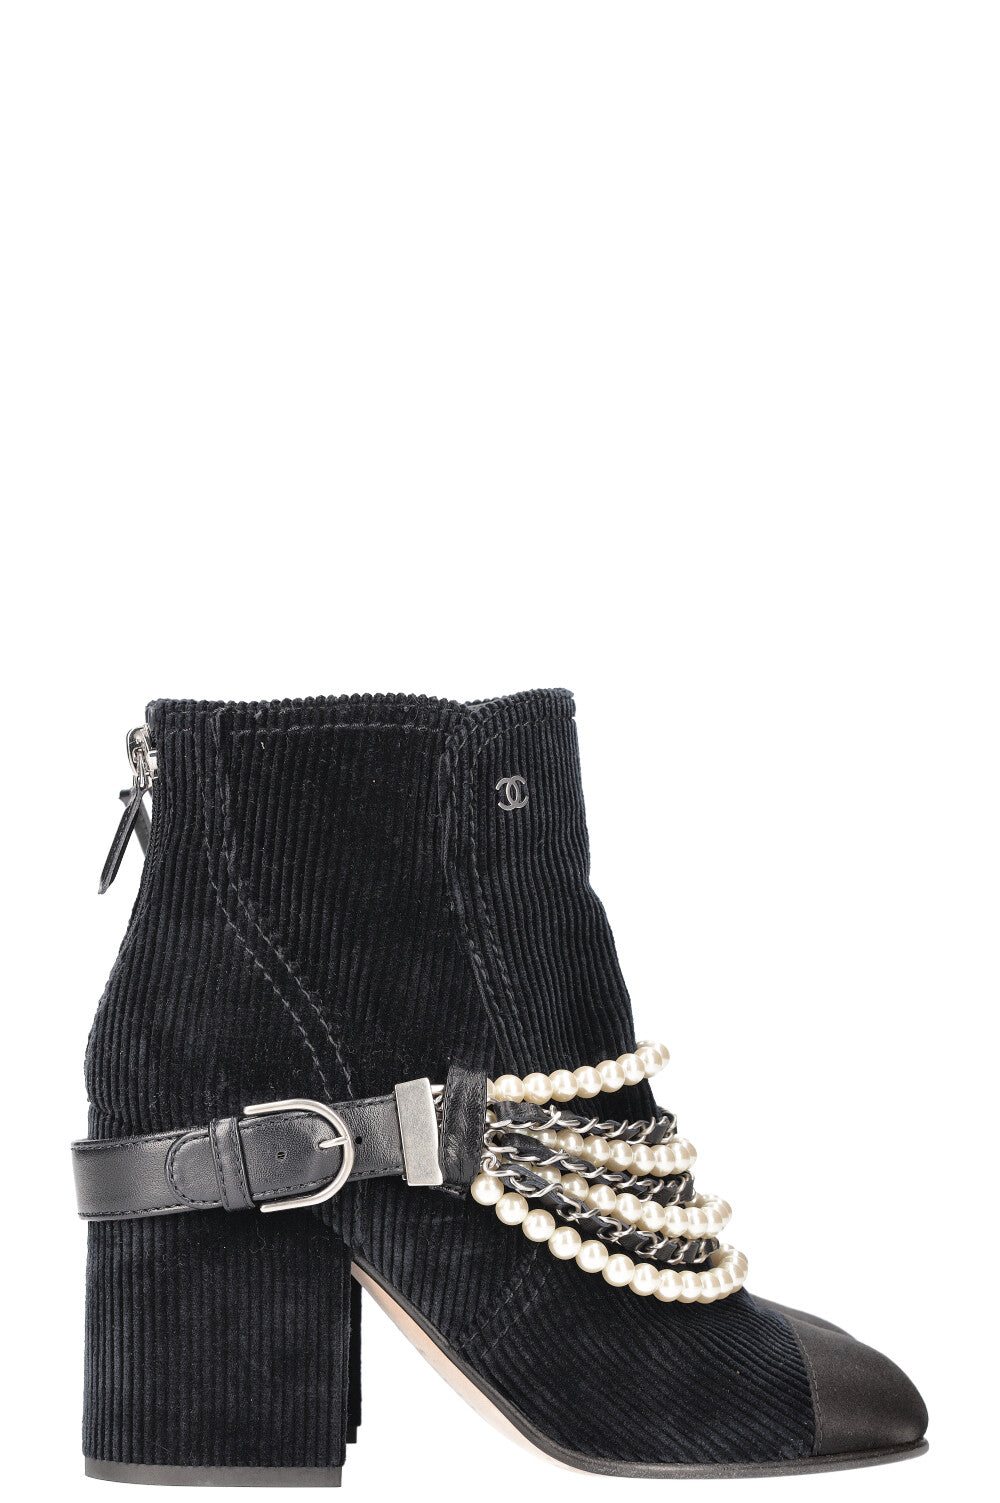 CHANEL Boots with Pearl Chain Cord & Satin Navy